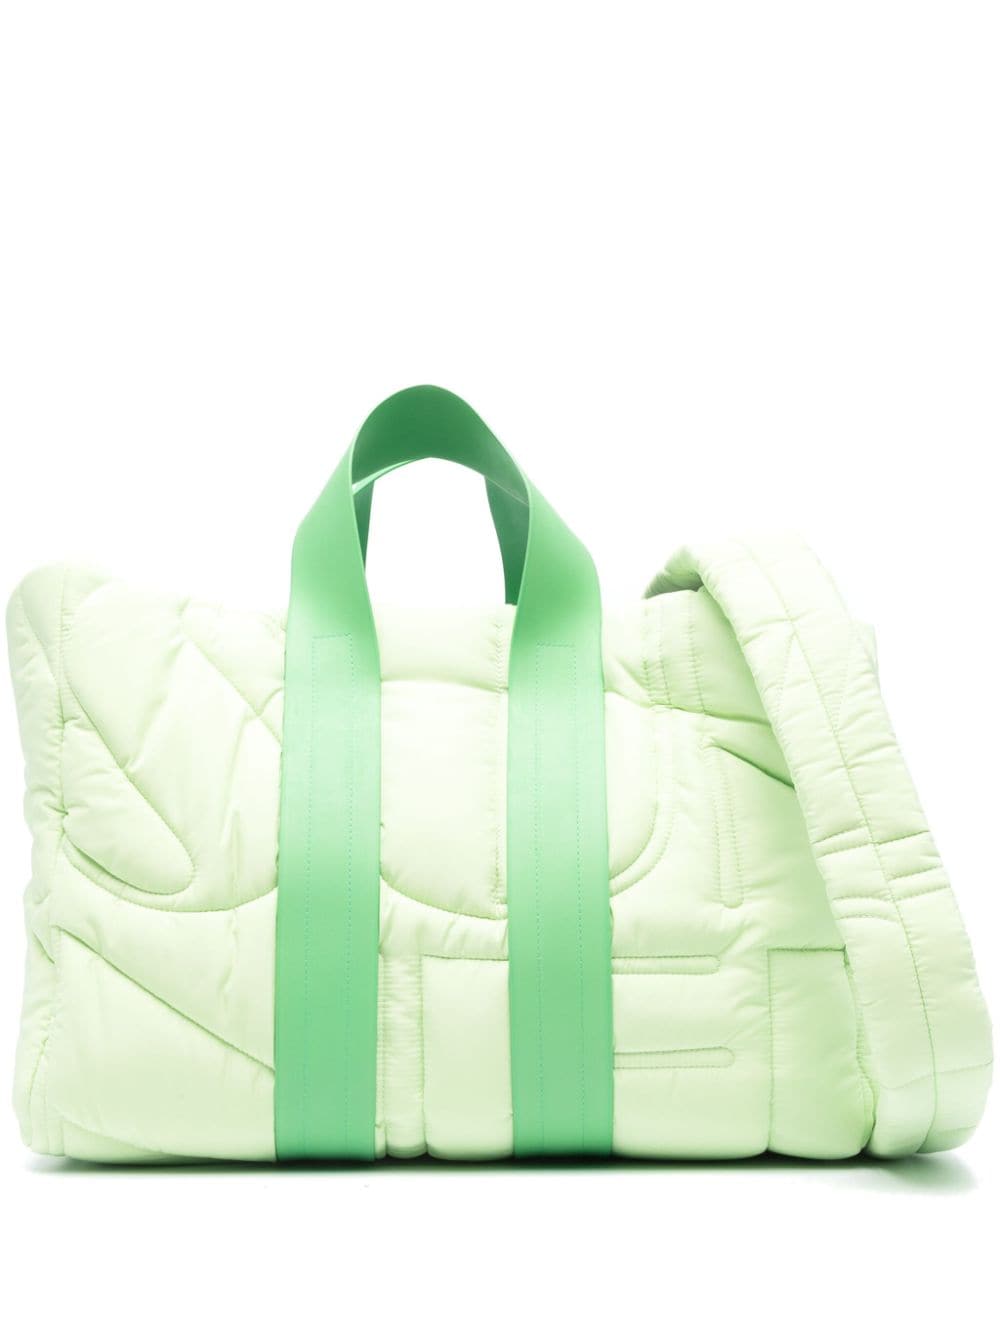 Sunnei Parallelepipedo Padded Tote Bag In Green